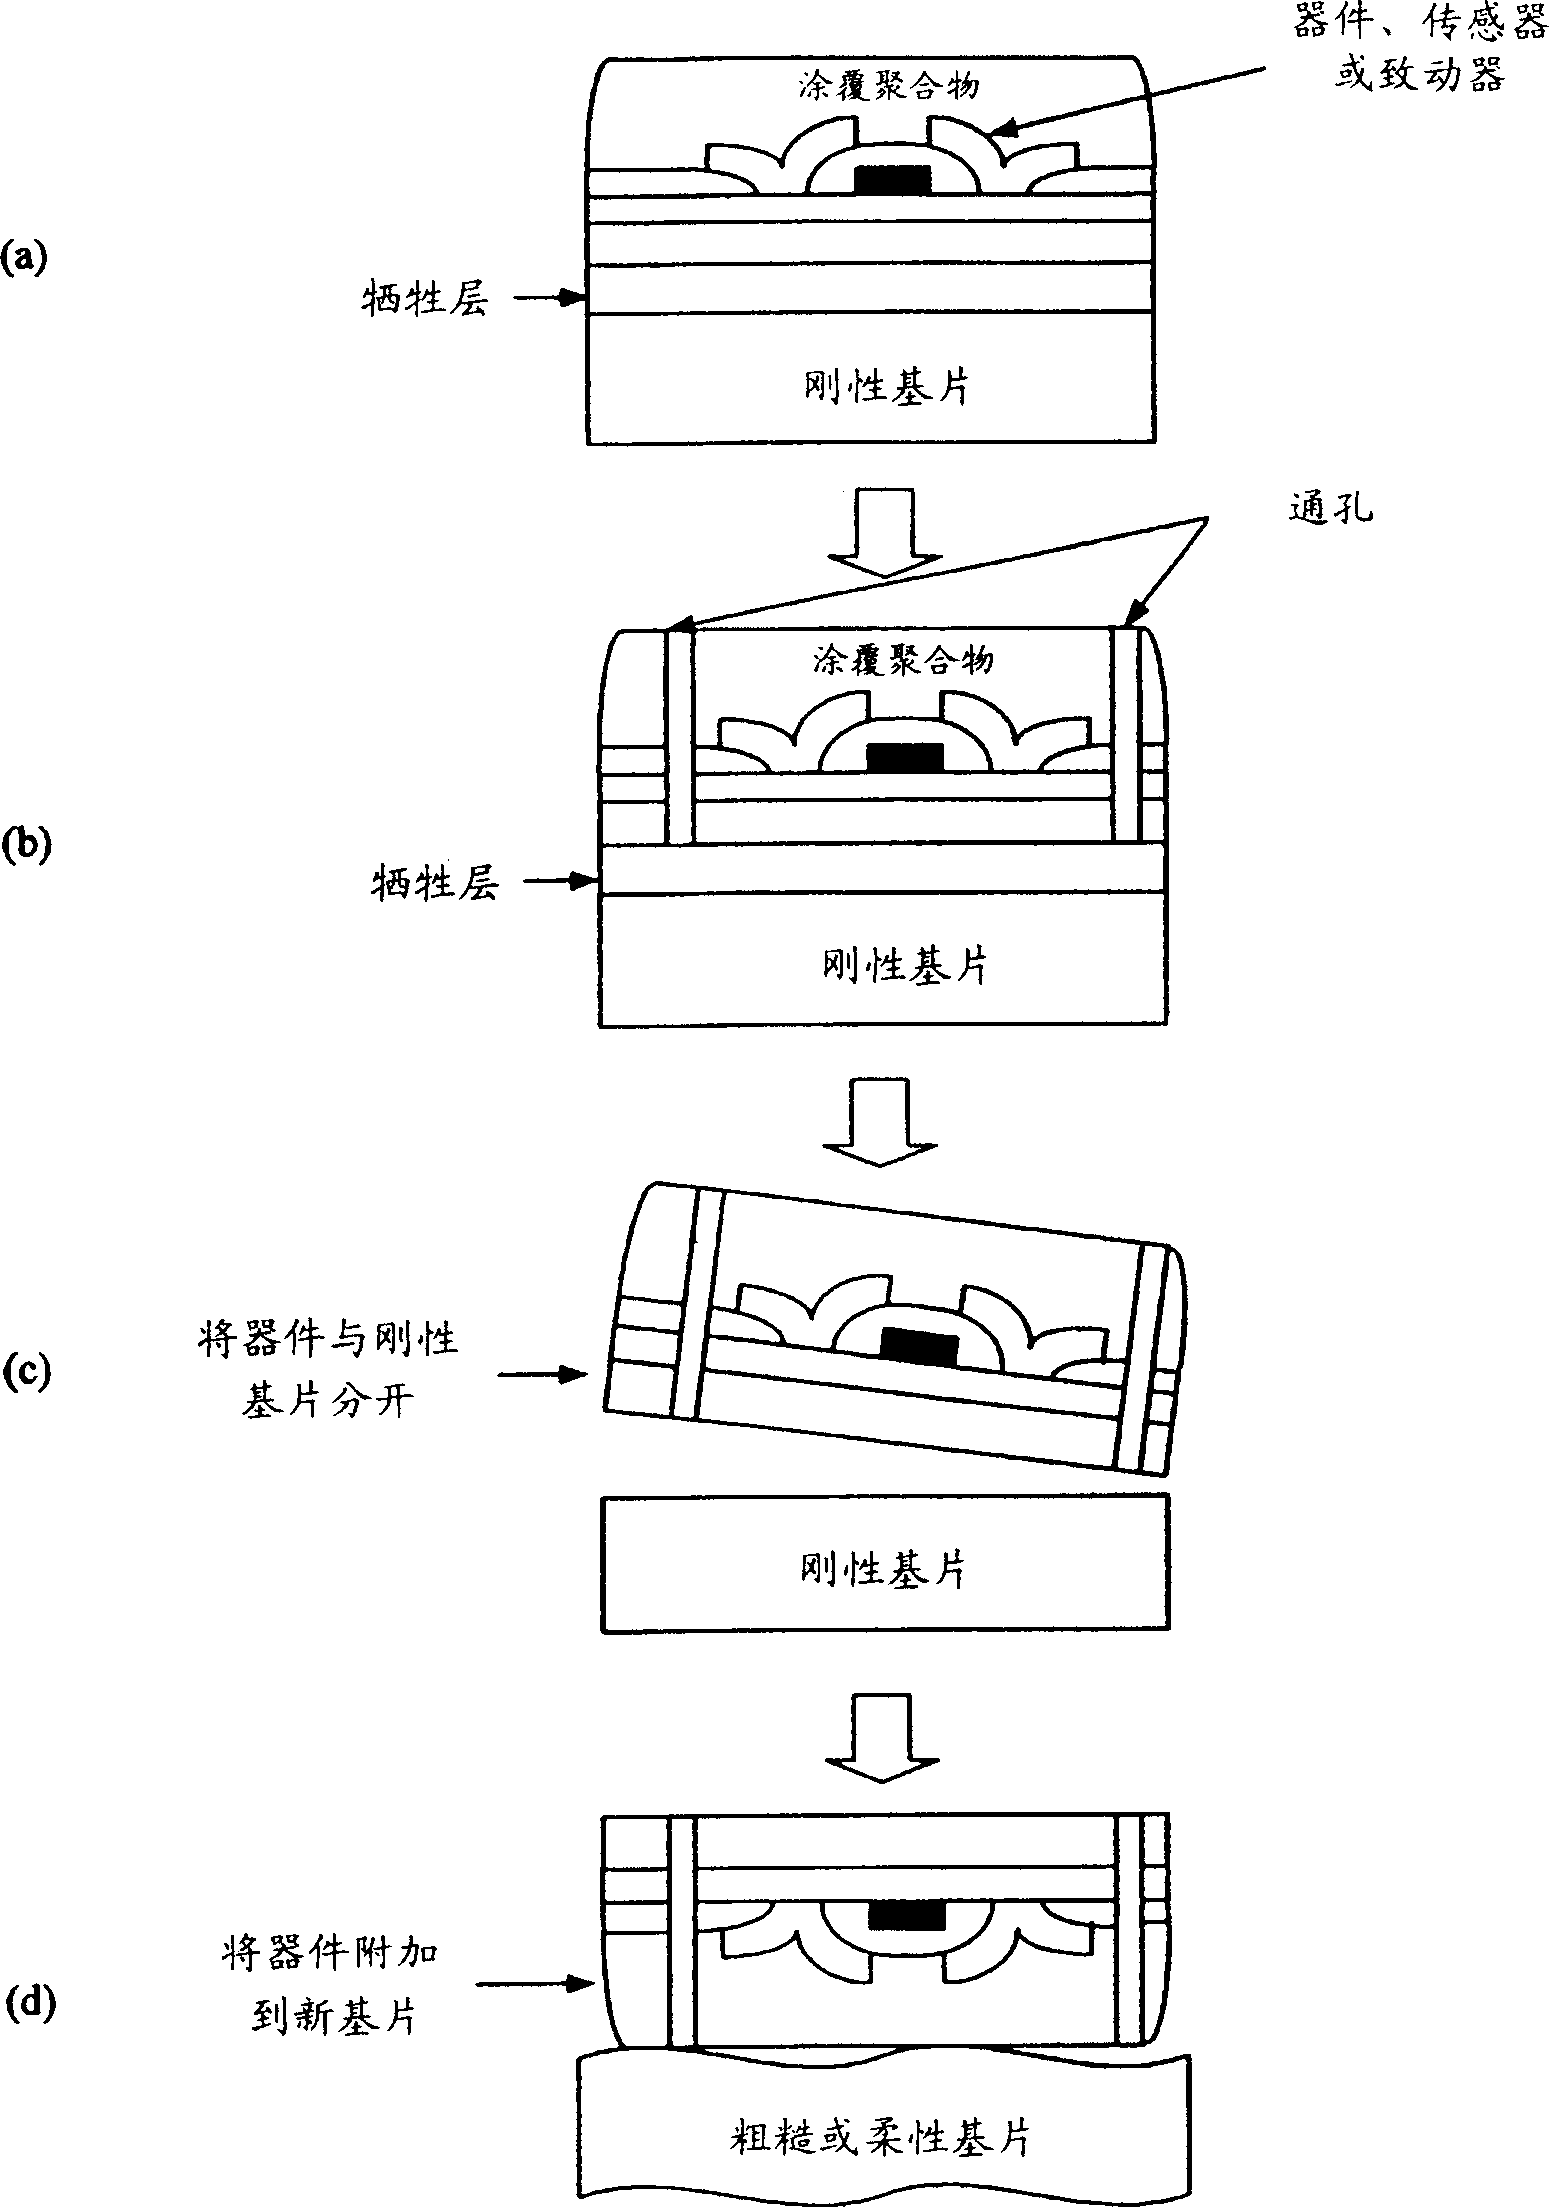 Deposited thin film and their use in separation and sarcrificial layer applications